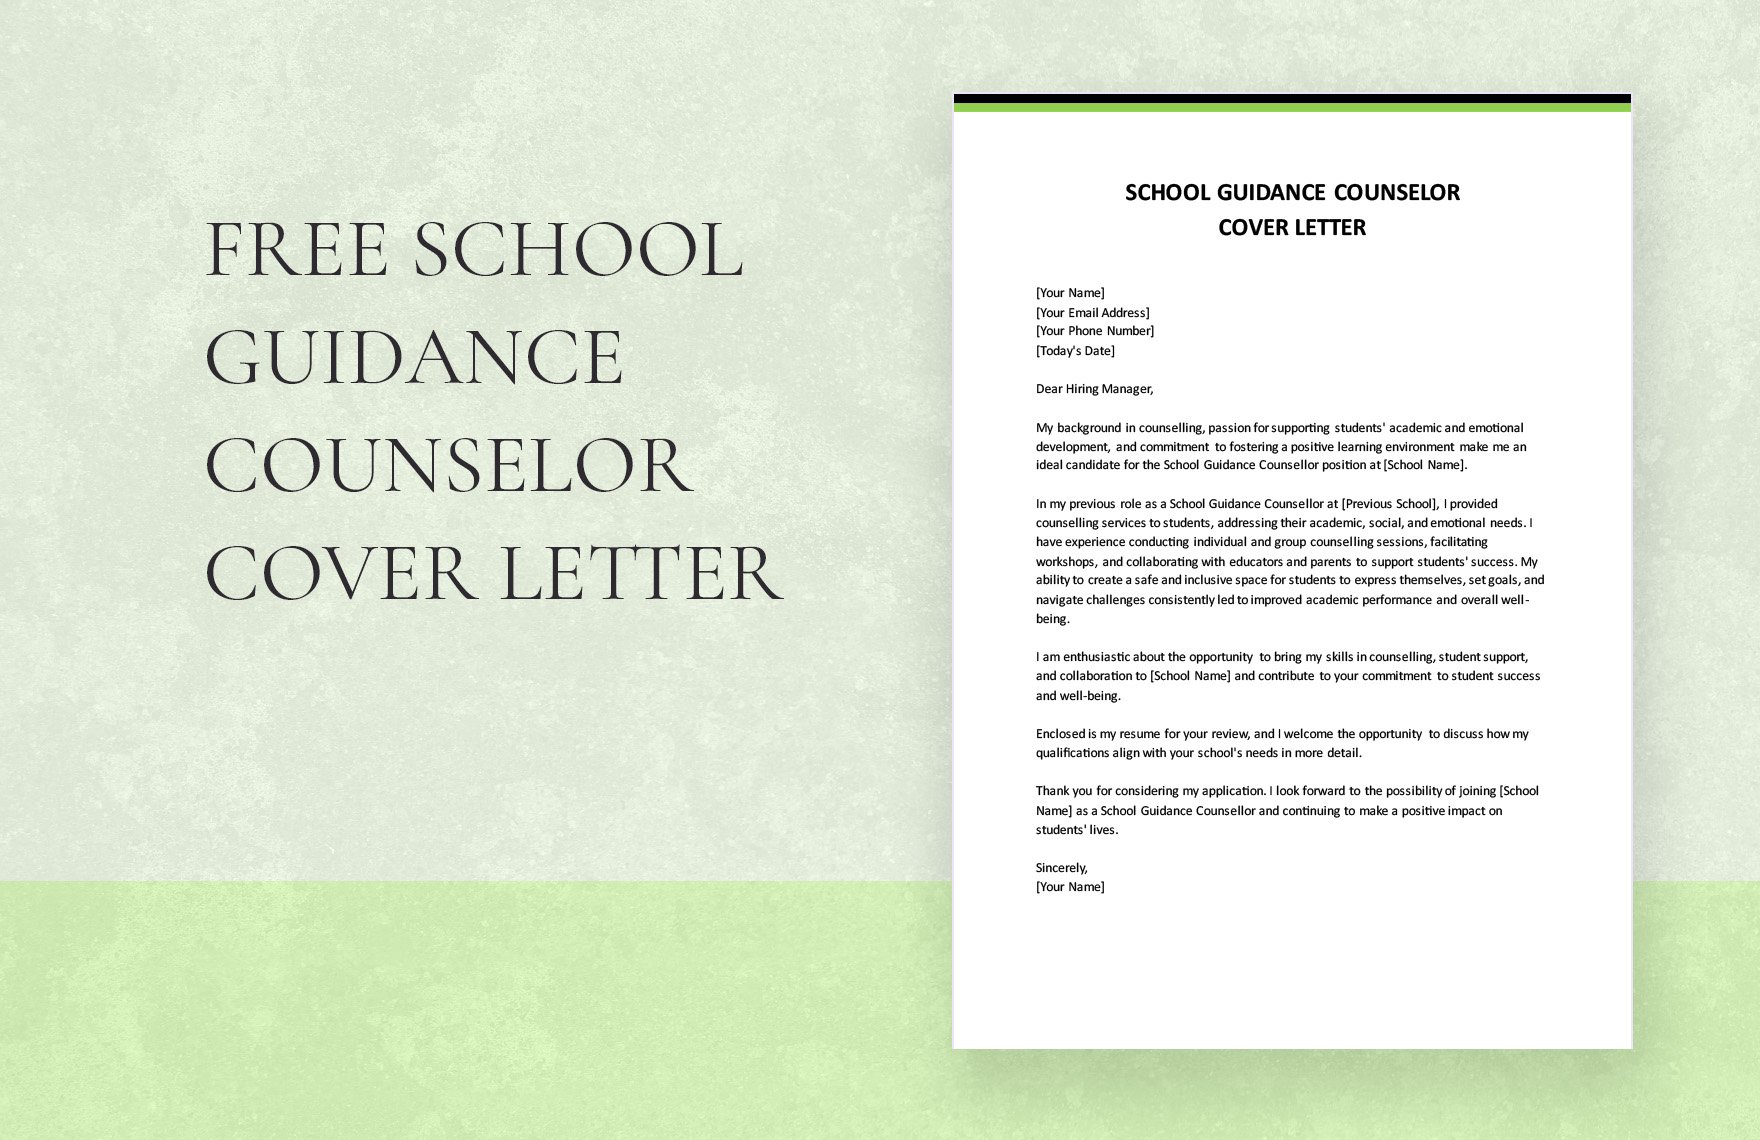 School Guidance Counselor Cover Letter in Word, Google Docs, PDF